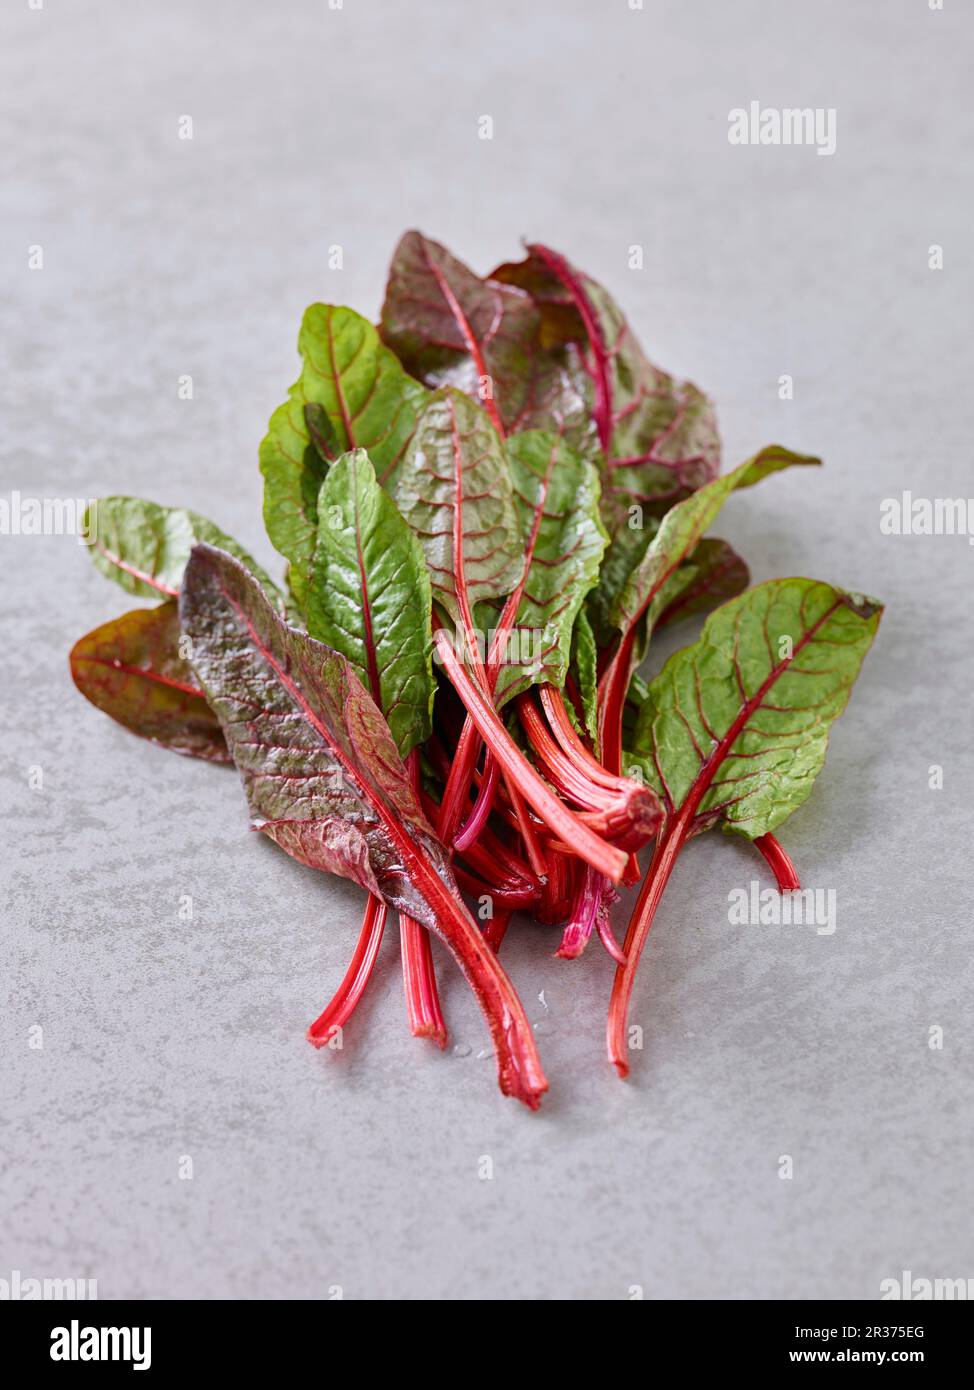 Red stemmed baby chard Stock Photo